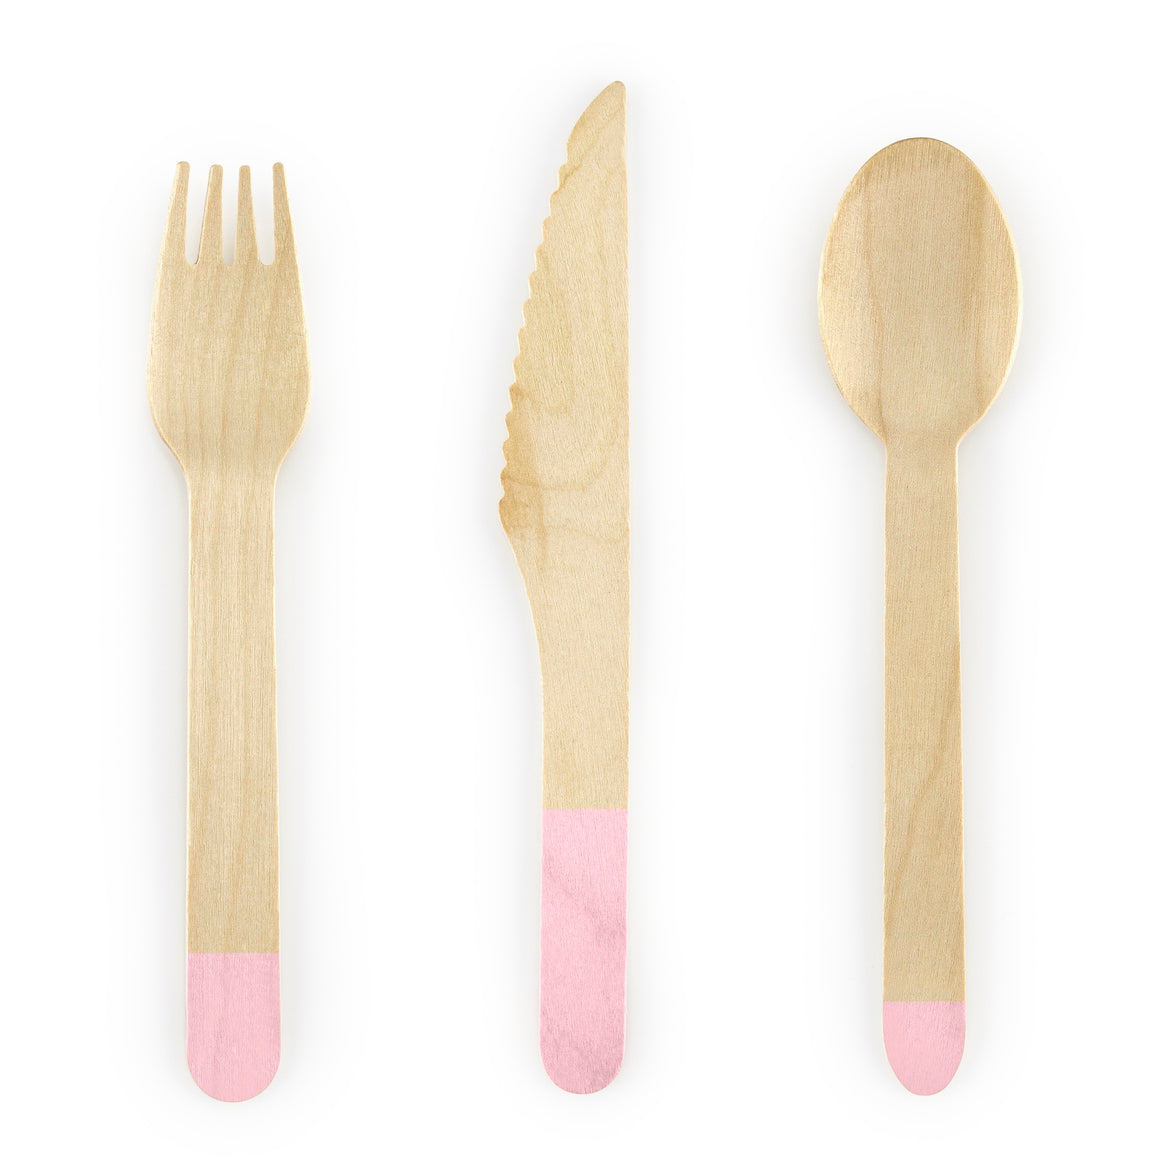 WOODEN CUTLERY SET - LIGHT PINK (for 6)